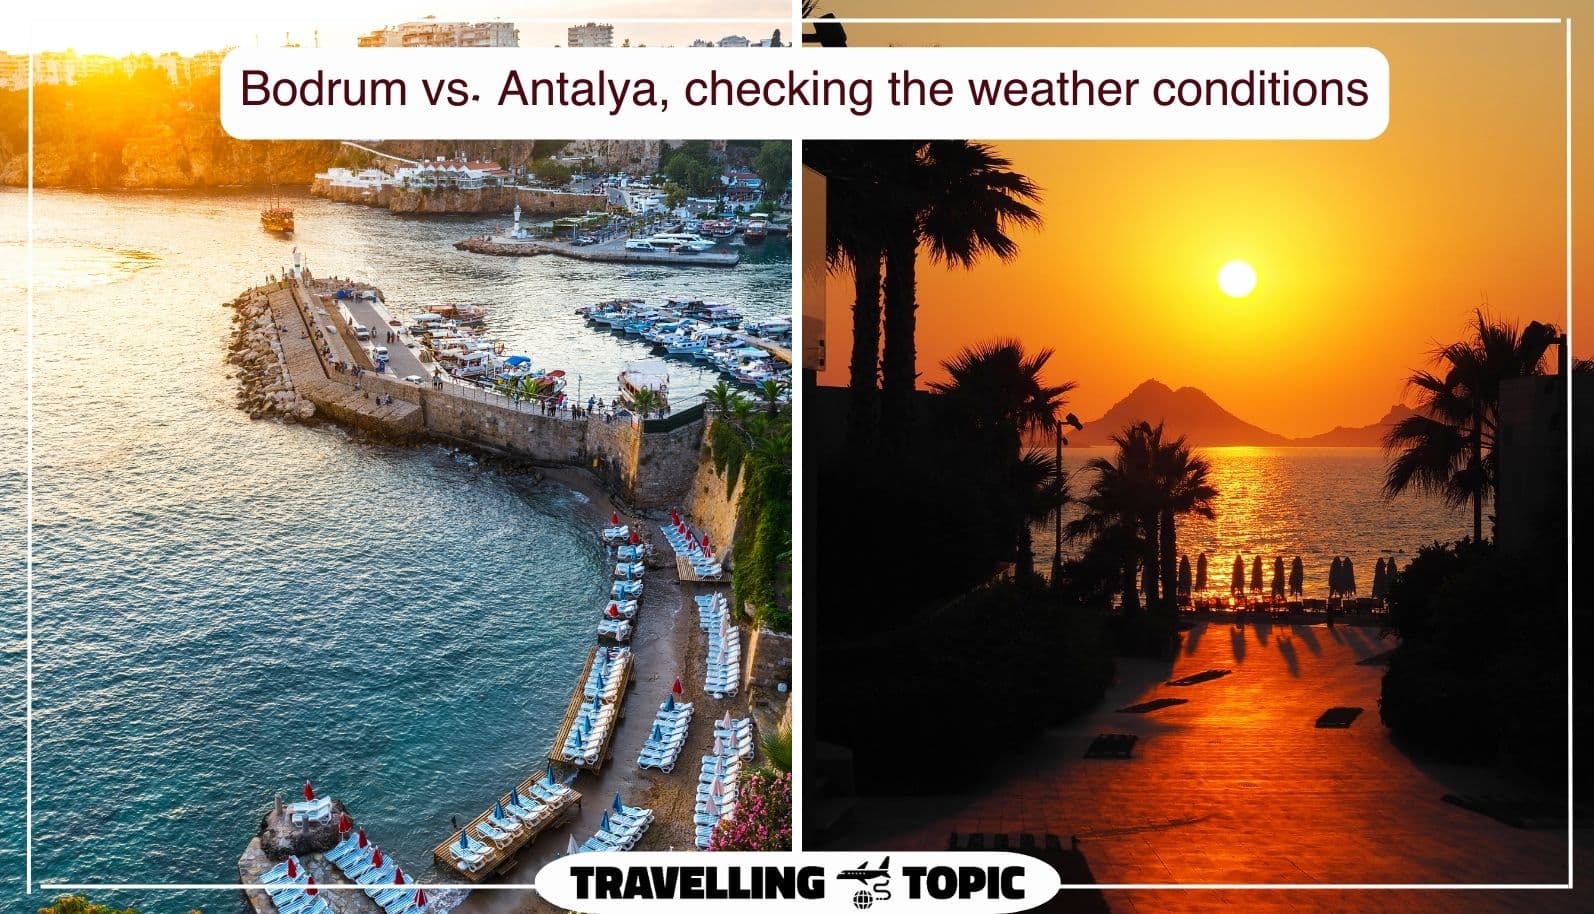 Bodrum vs. Antalya, checking the weather conditions